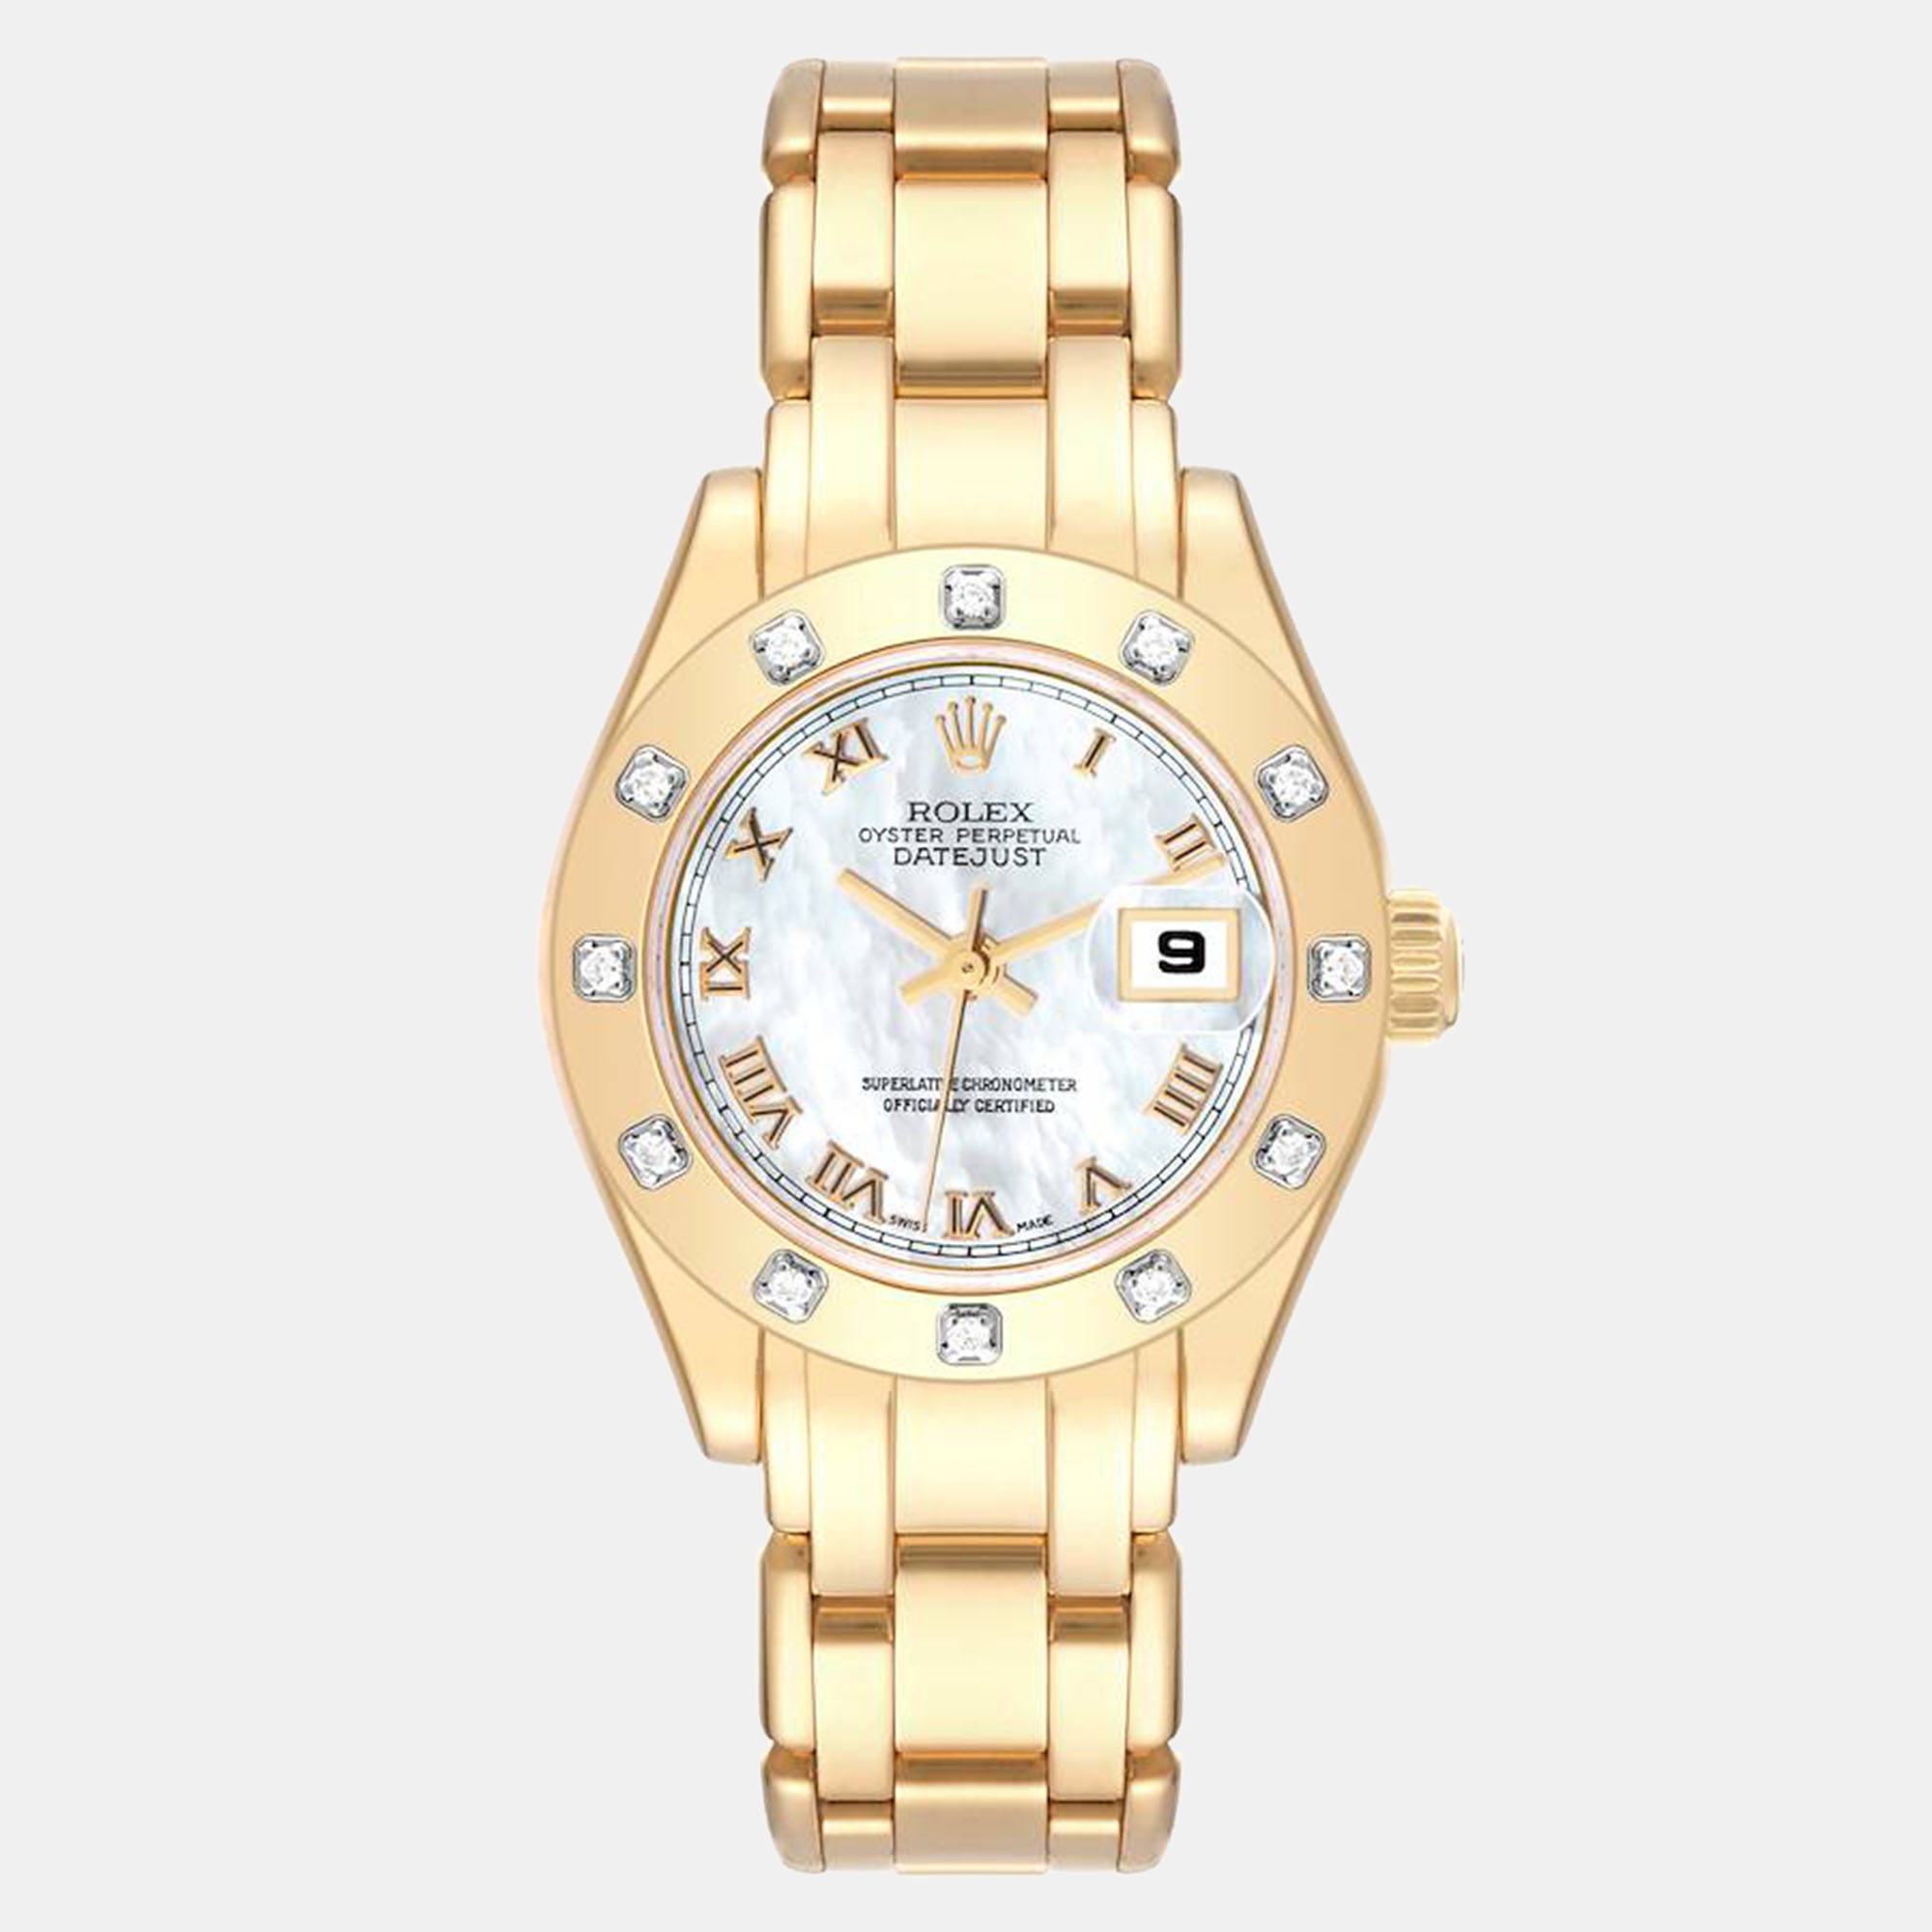 Rolex pearlmaster yellow gold white dial diamond ladies watch 80318 29 mm